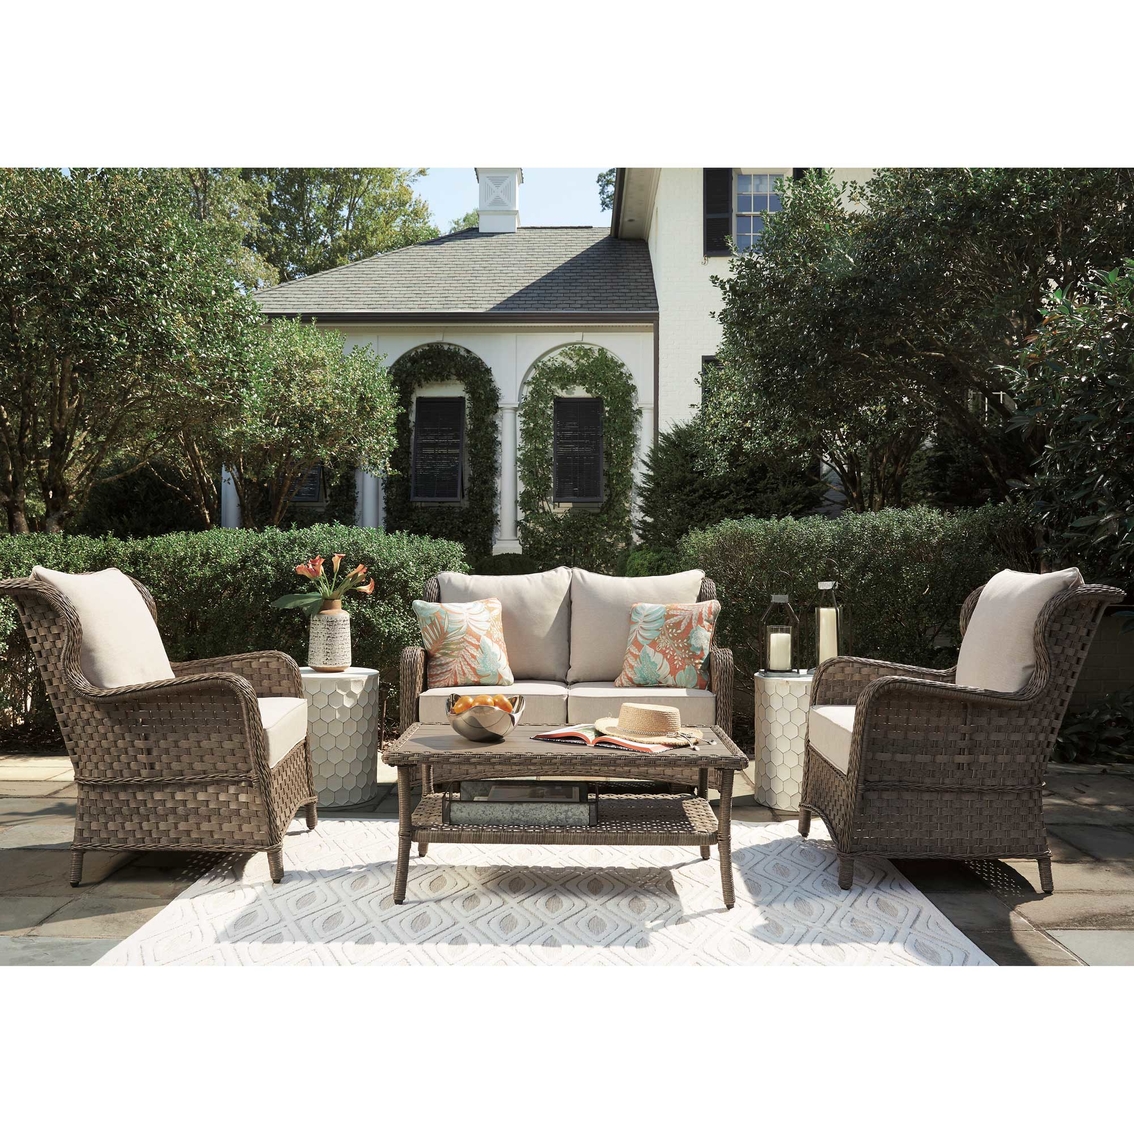 Signature Design by Ashley Clear Ridge Outdoor Lounge Chair 2 pk. - Image 6 of 6